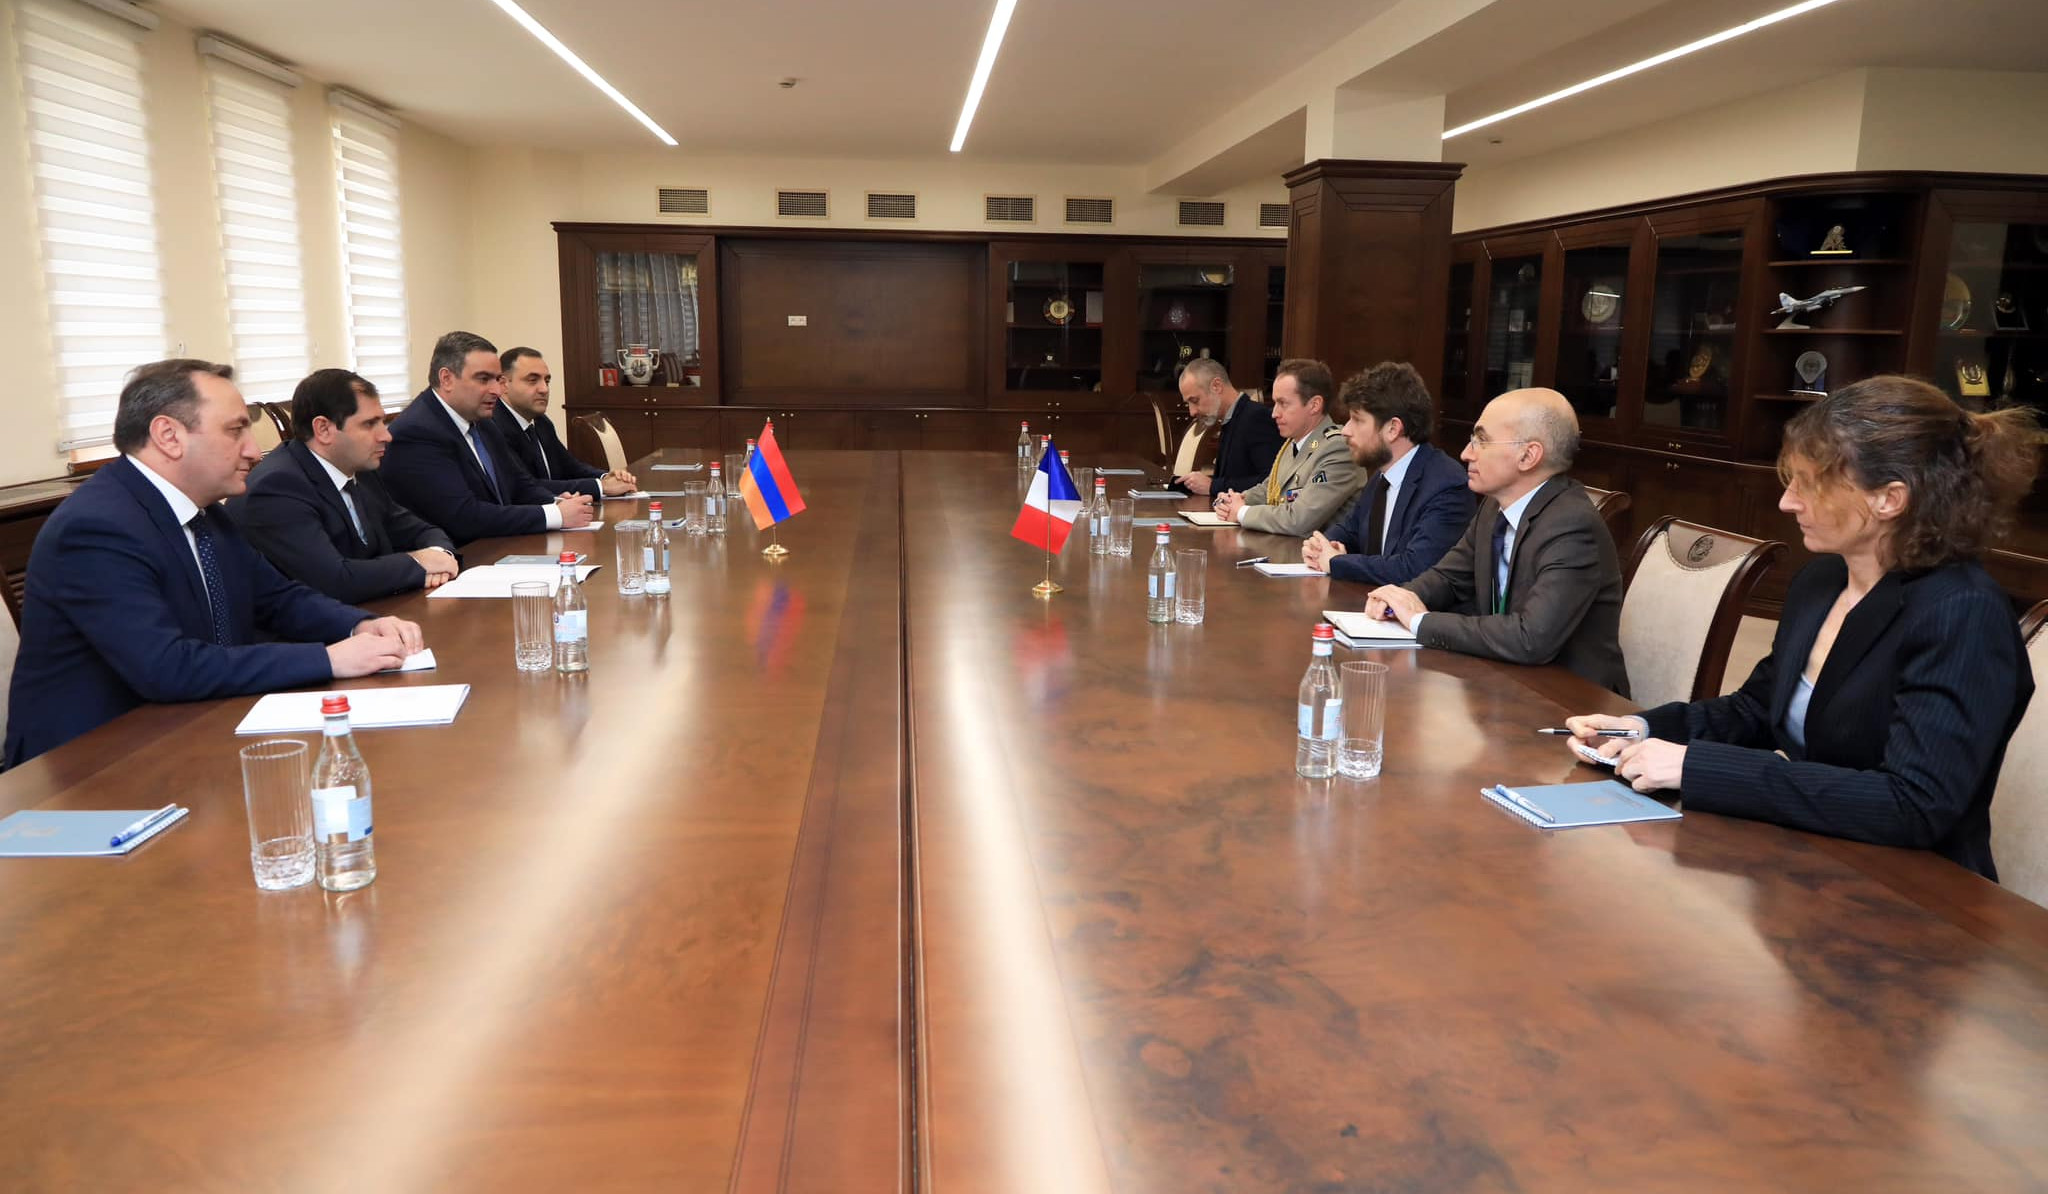 Papikyan and French ambassador discussed issues related to regional security